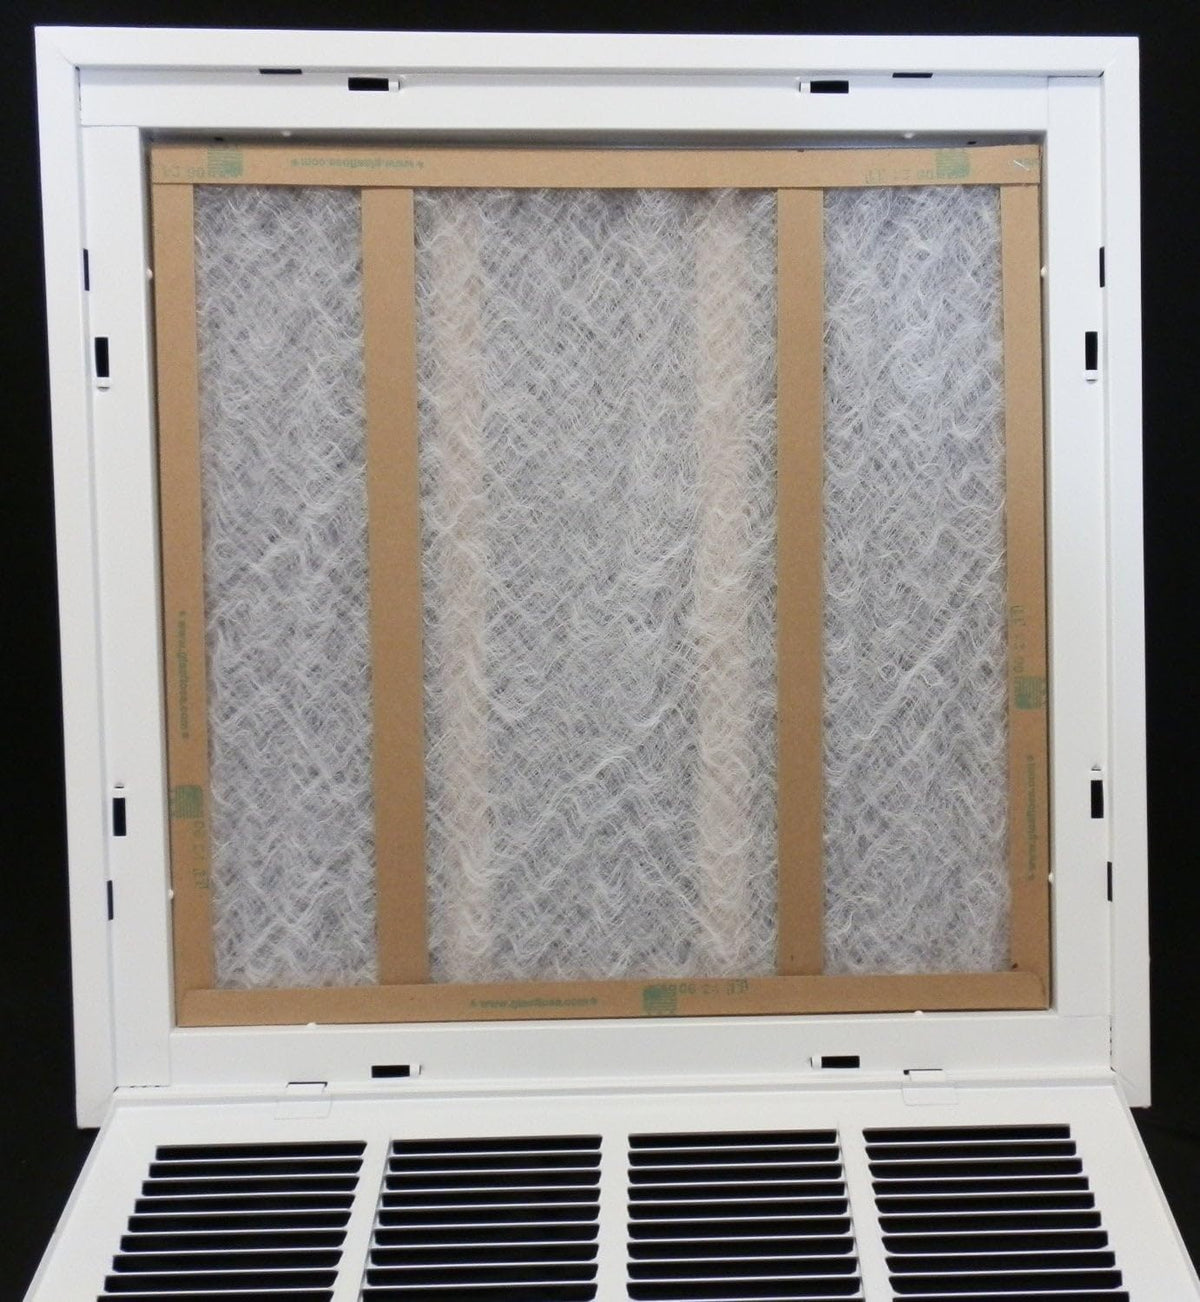 25&quot; X 24&quot; Steel Return Air Filter Grille for 1&quot; Filter - Removable Frame - [Outer Dimensions: 27 5/8&quot; X 26 5/8&quot;]